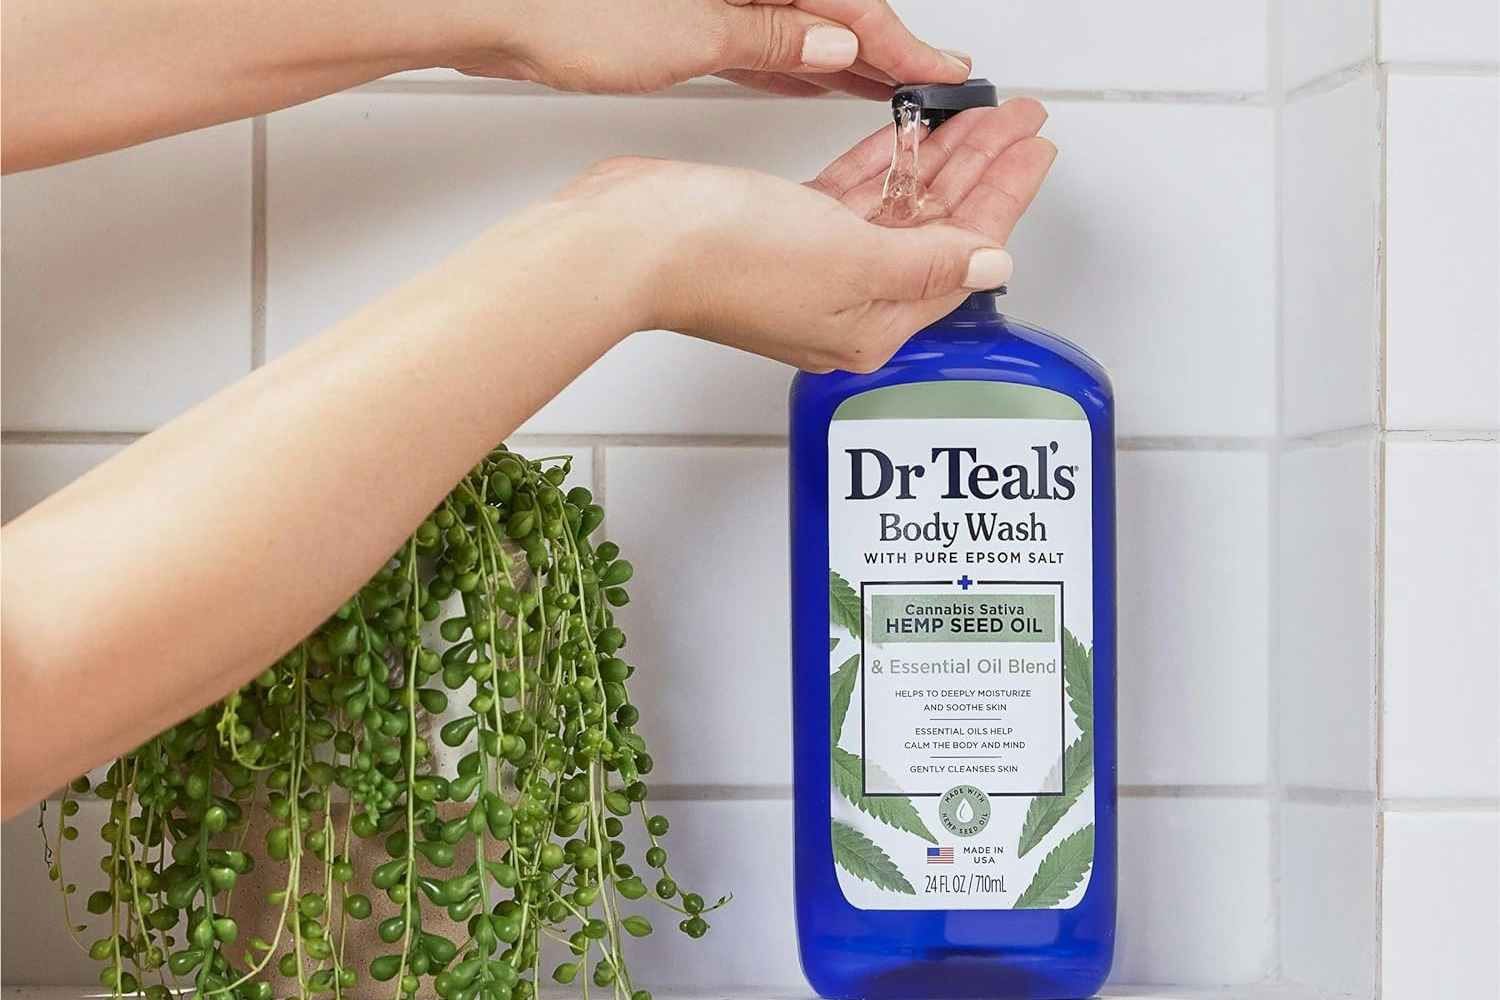 Dr Teal's Body Wash 2-Pack, as Low as $6.33 on Amazon (Reg. $13)